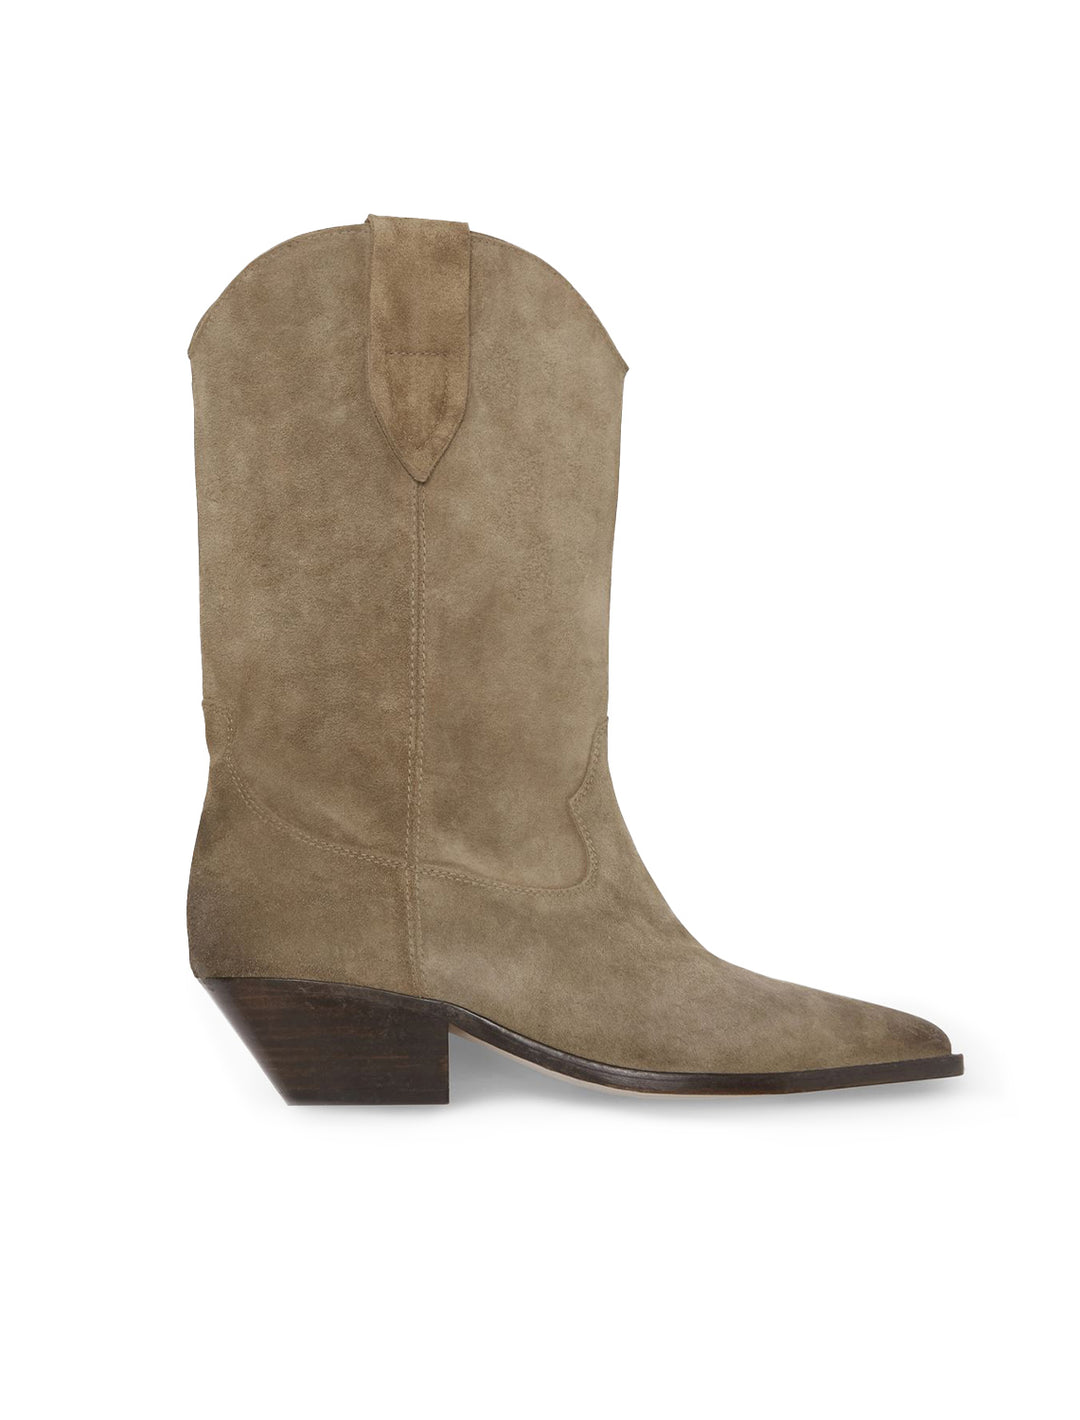 Side view of Isabel Marant Étoile's Duerto Boot in Taupe.